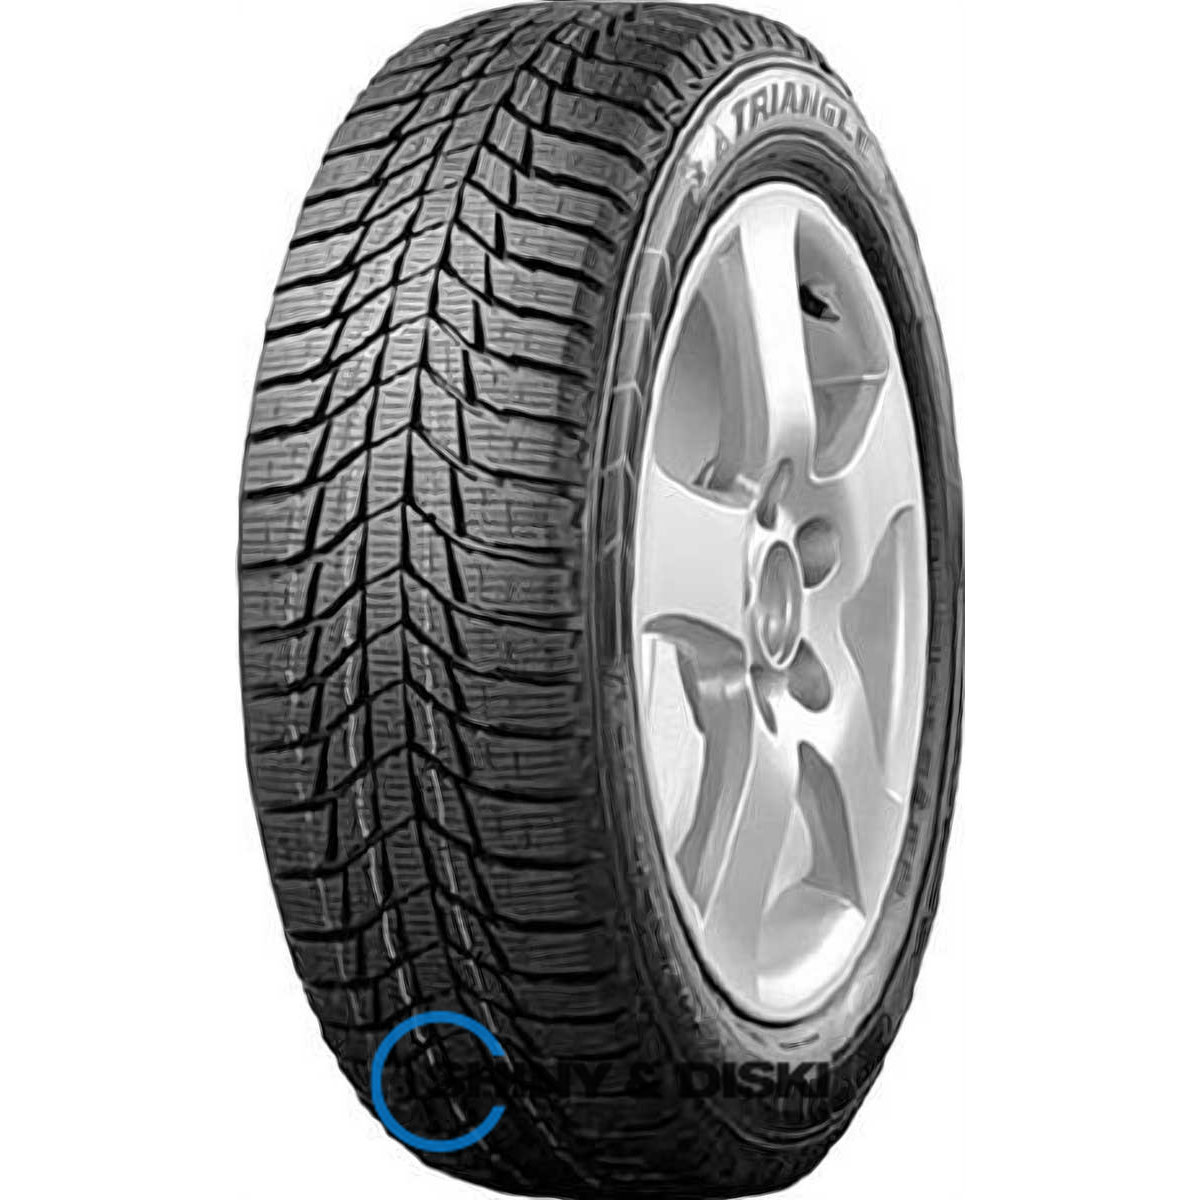 покрышки triangle pl01 195/55 r16 91r